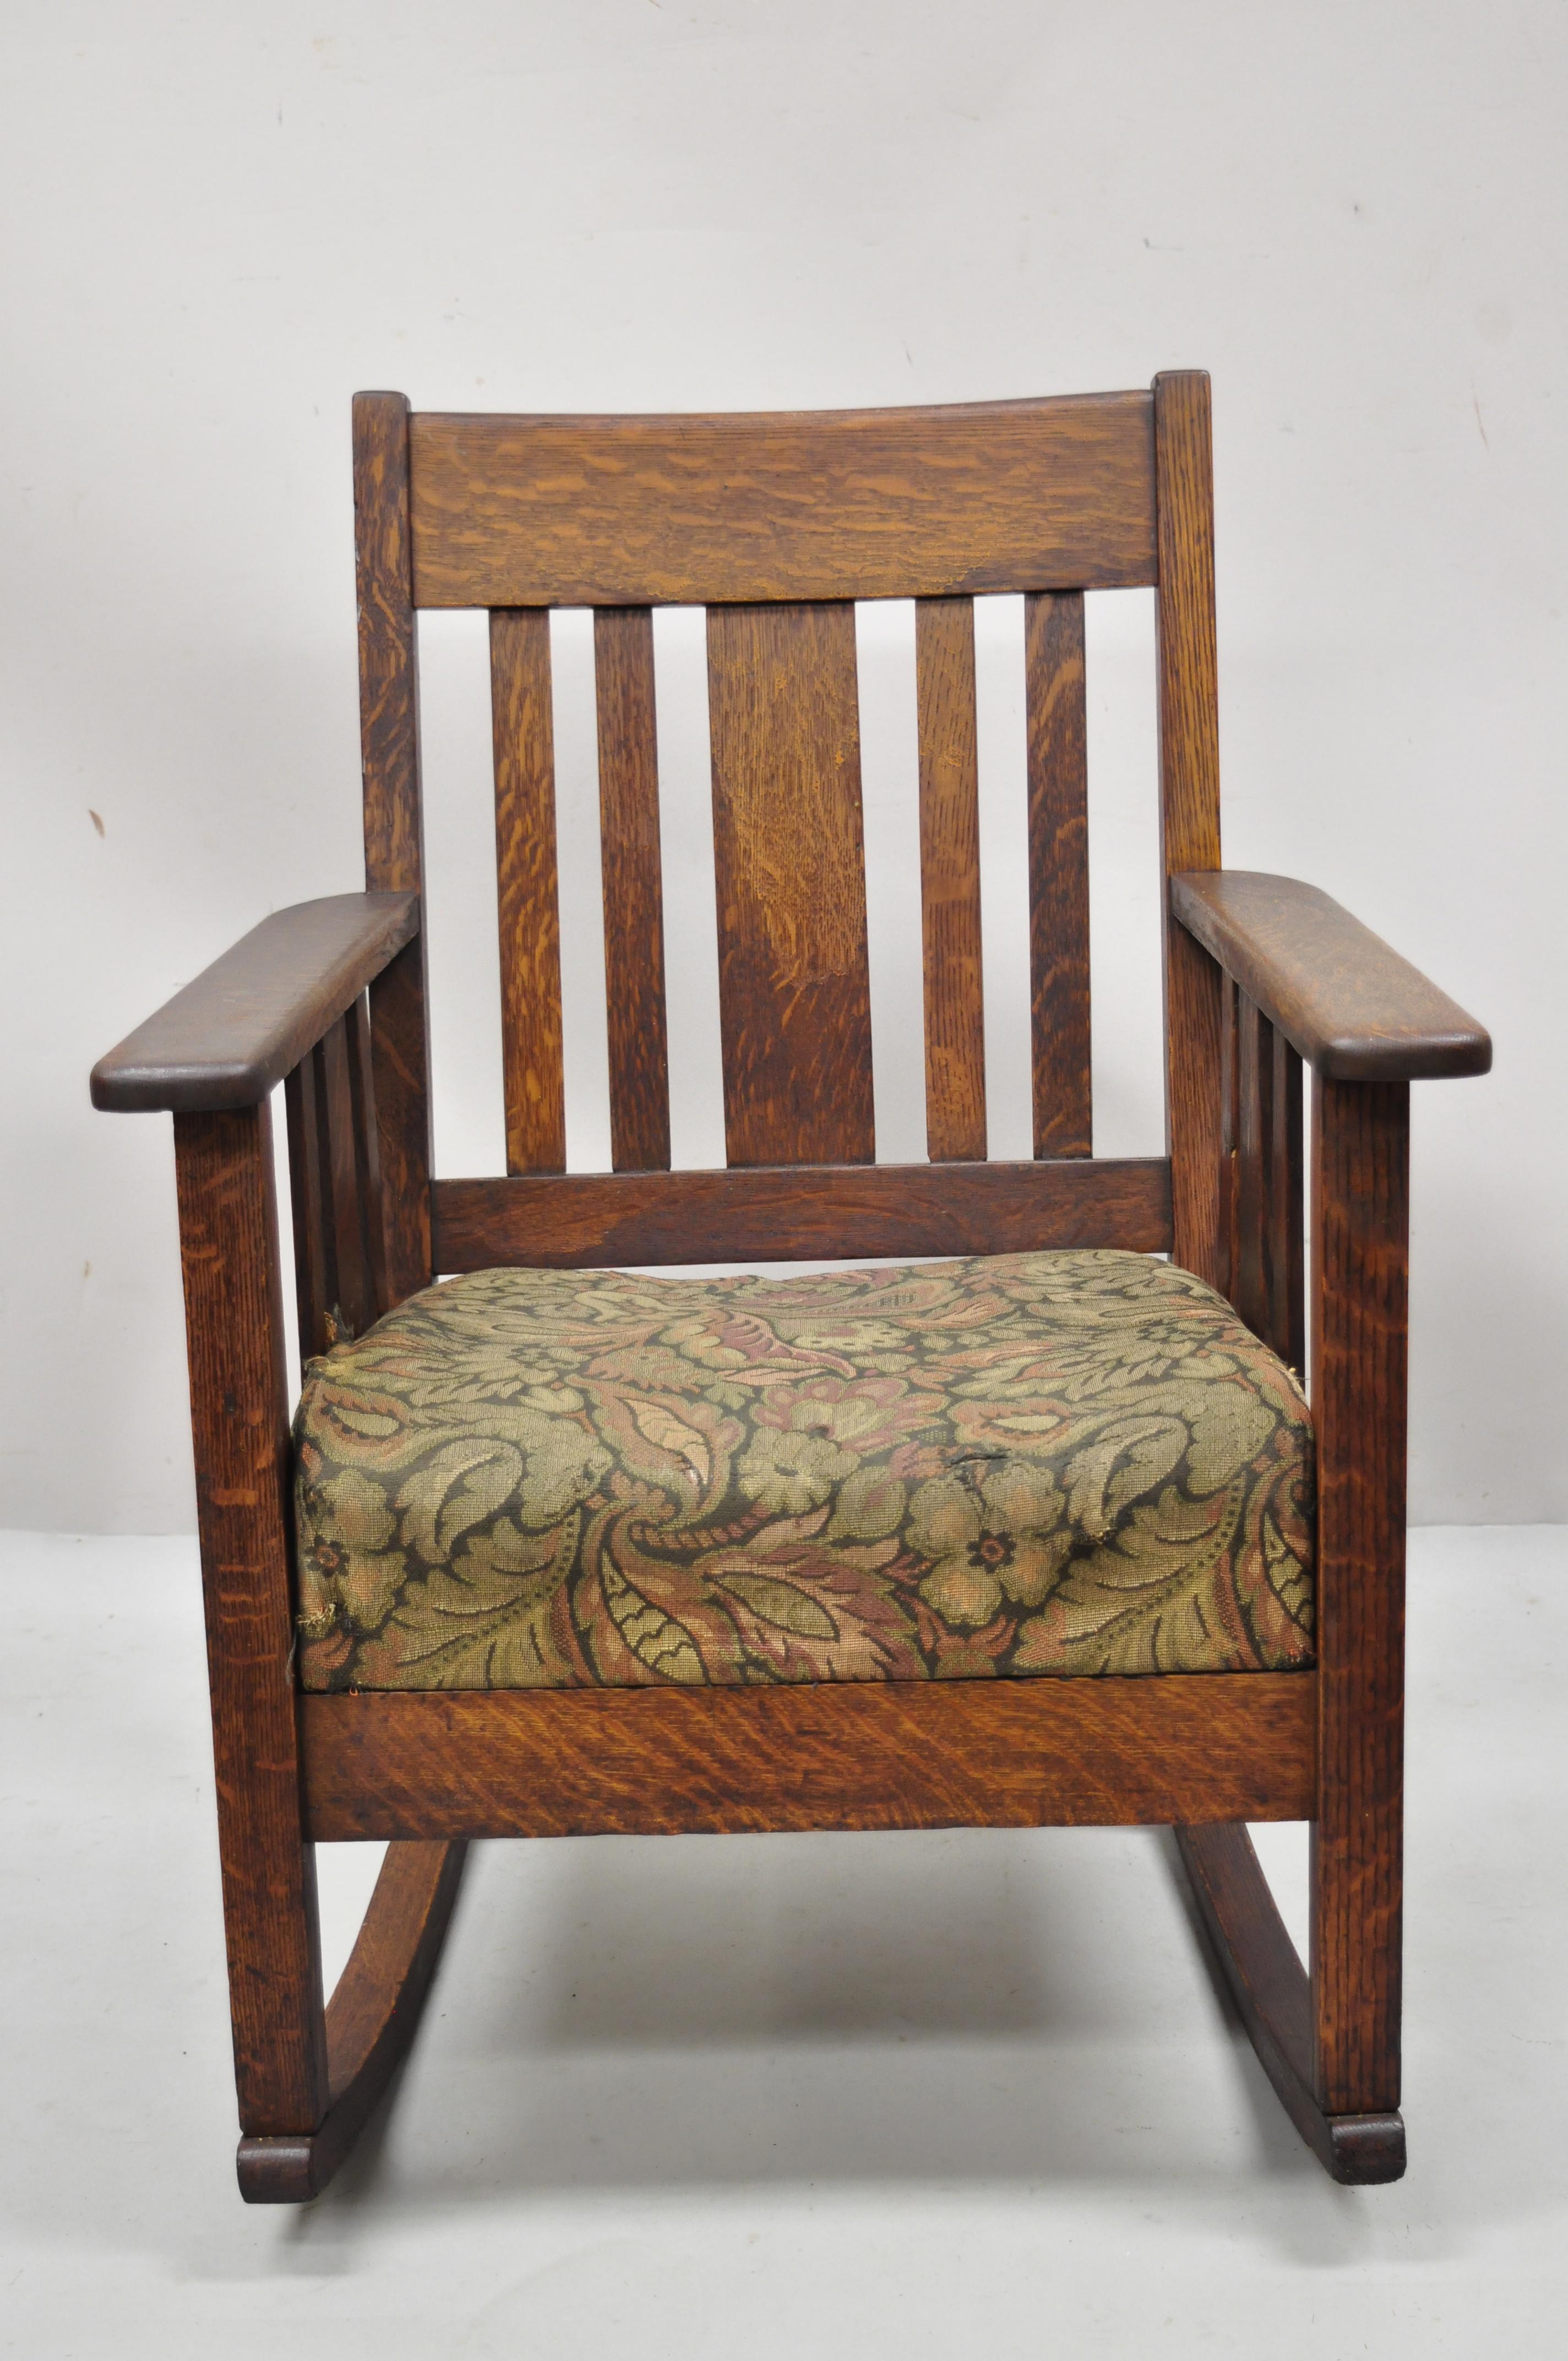 Antique Arts & Crafts Mission oak stickley style slat back rocker rocking chair. Item features slat back and sides, upholstered drop seat, solid wood frame, beautiful wood grain, very nice antique item, great style and form. Maker unknown, Circa